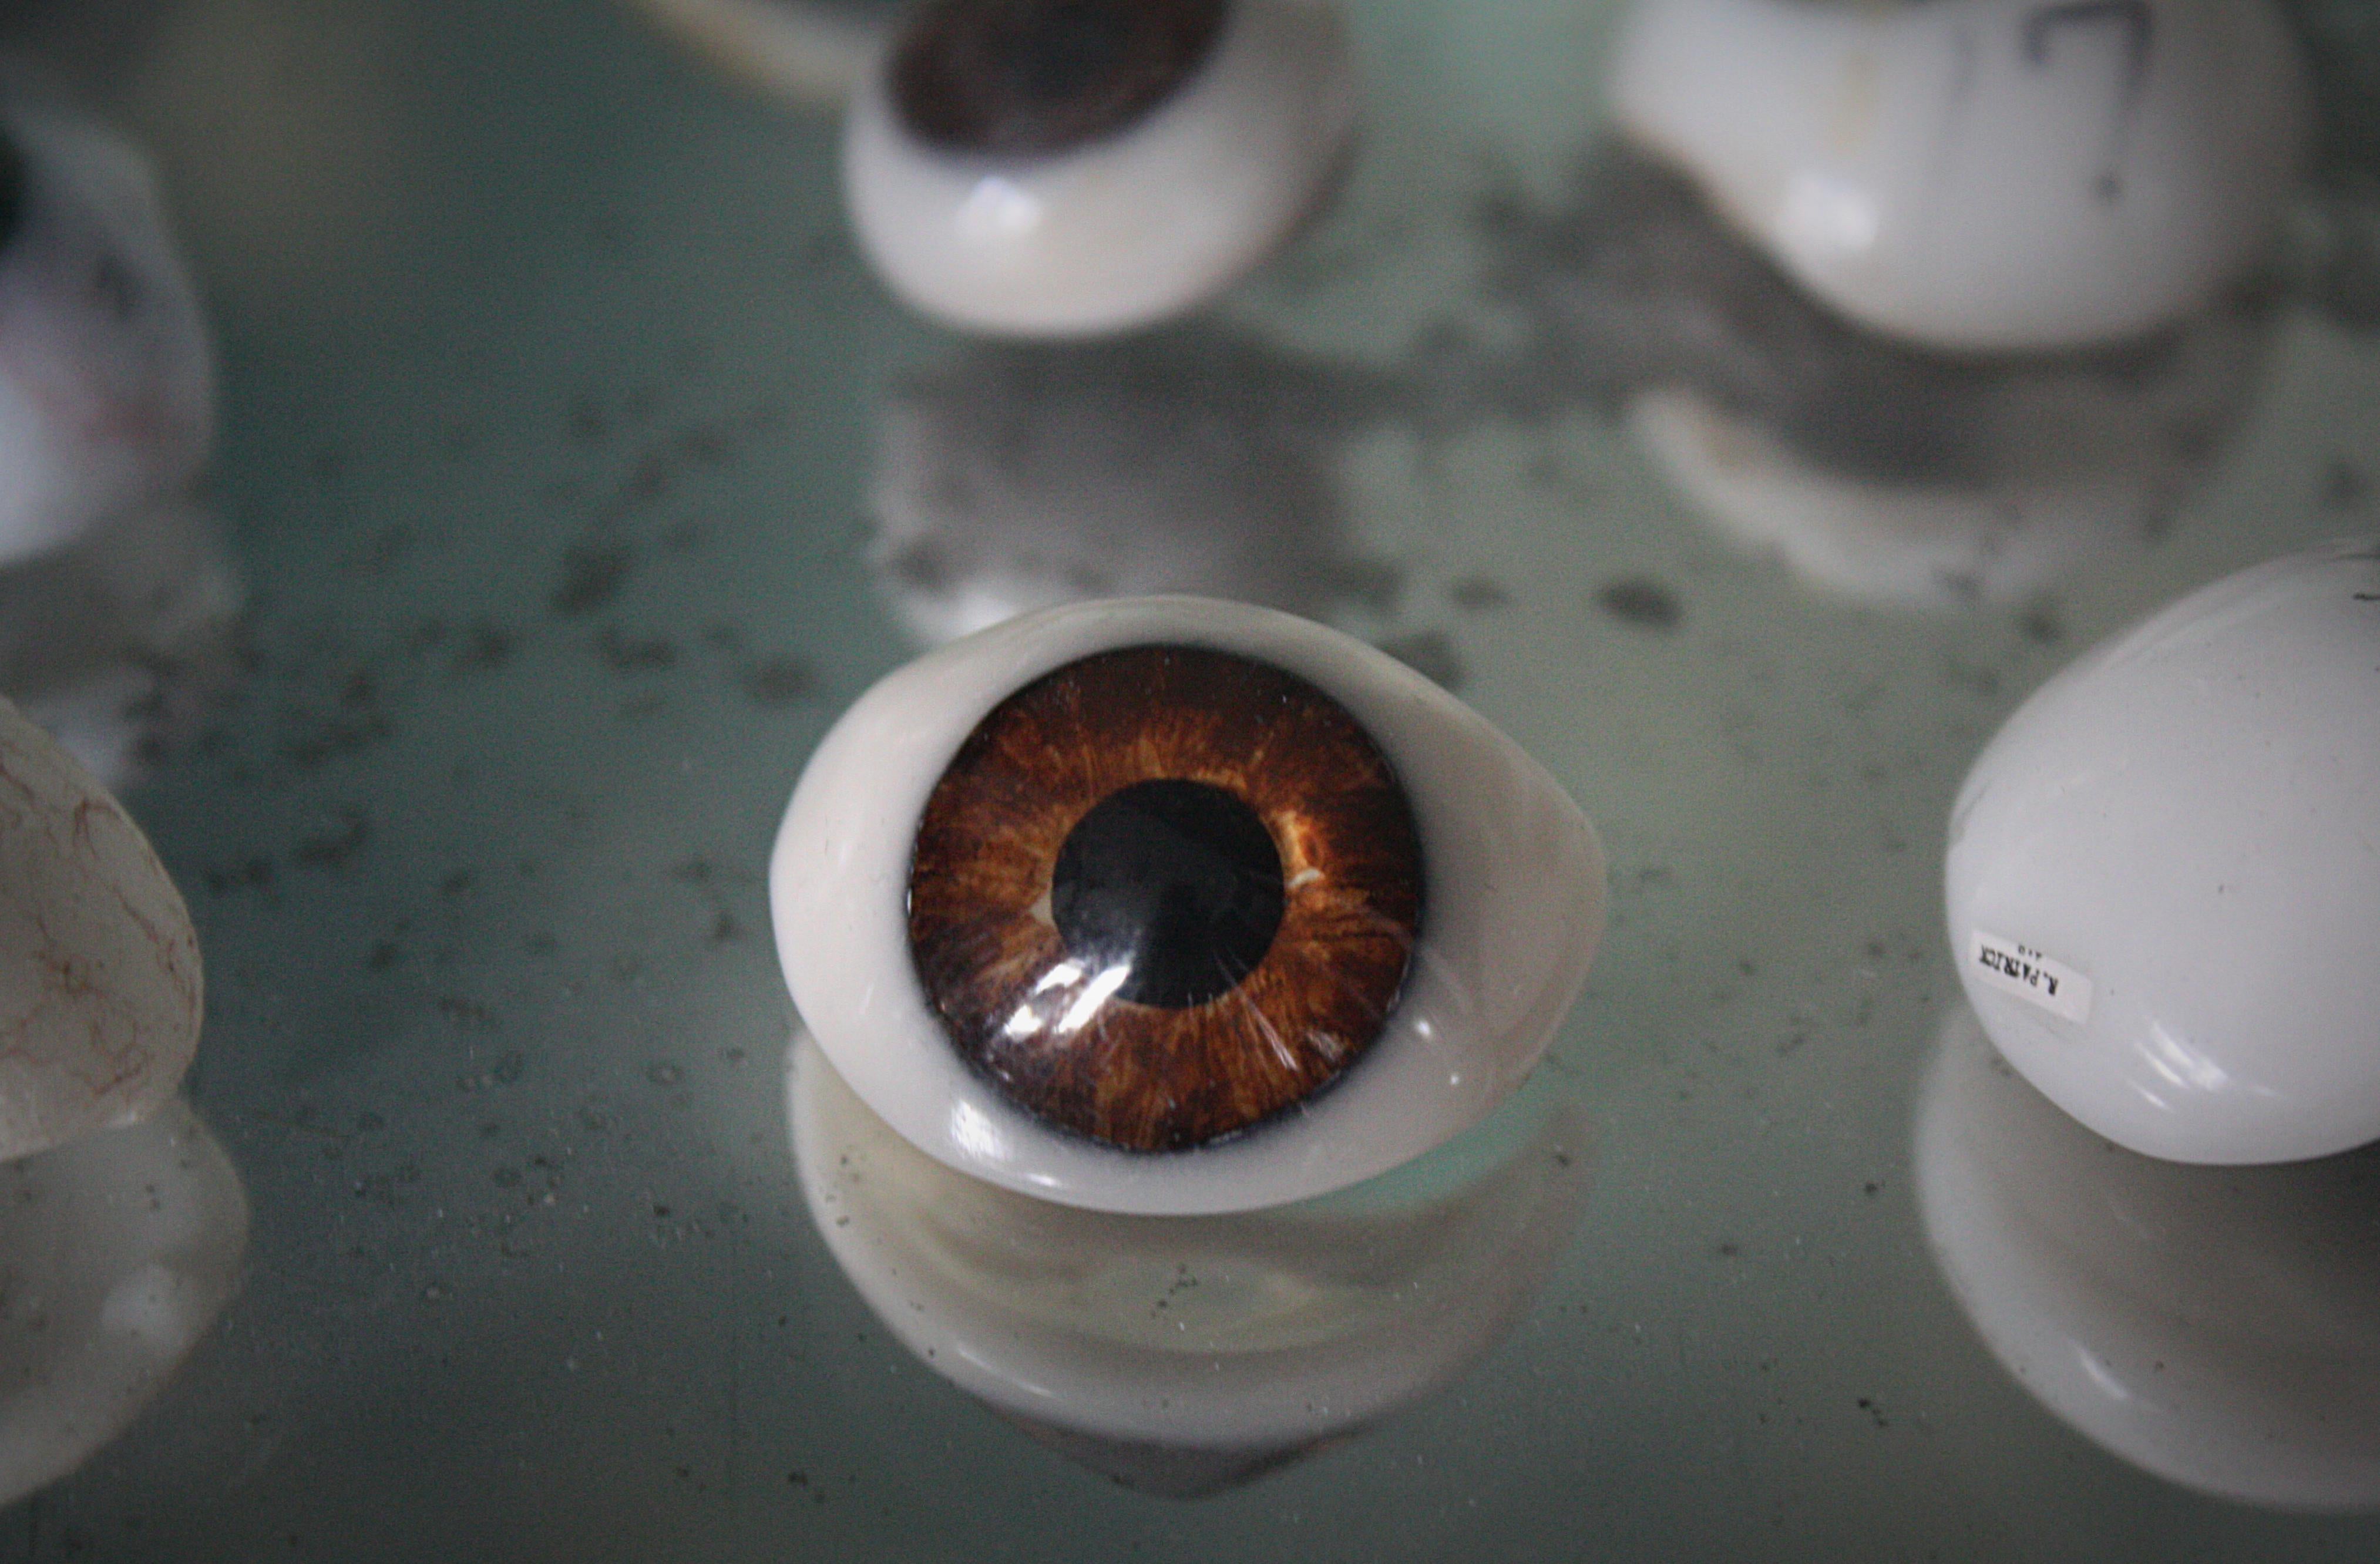 Here we have a rare and large collection of prosthetic eyes, removed from a funeral directors in the east of England. Unsure if these where used first hand within the funeral directors for display purposes or actually used for open coffins. There